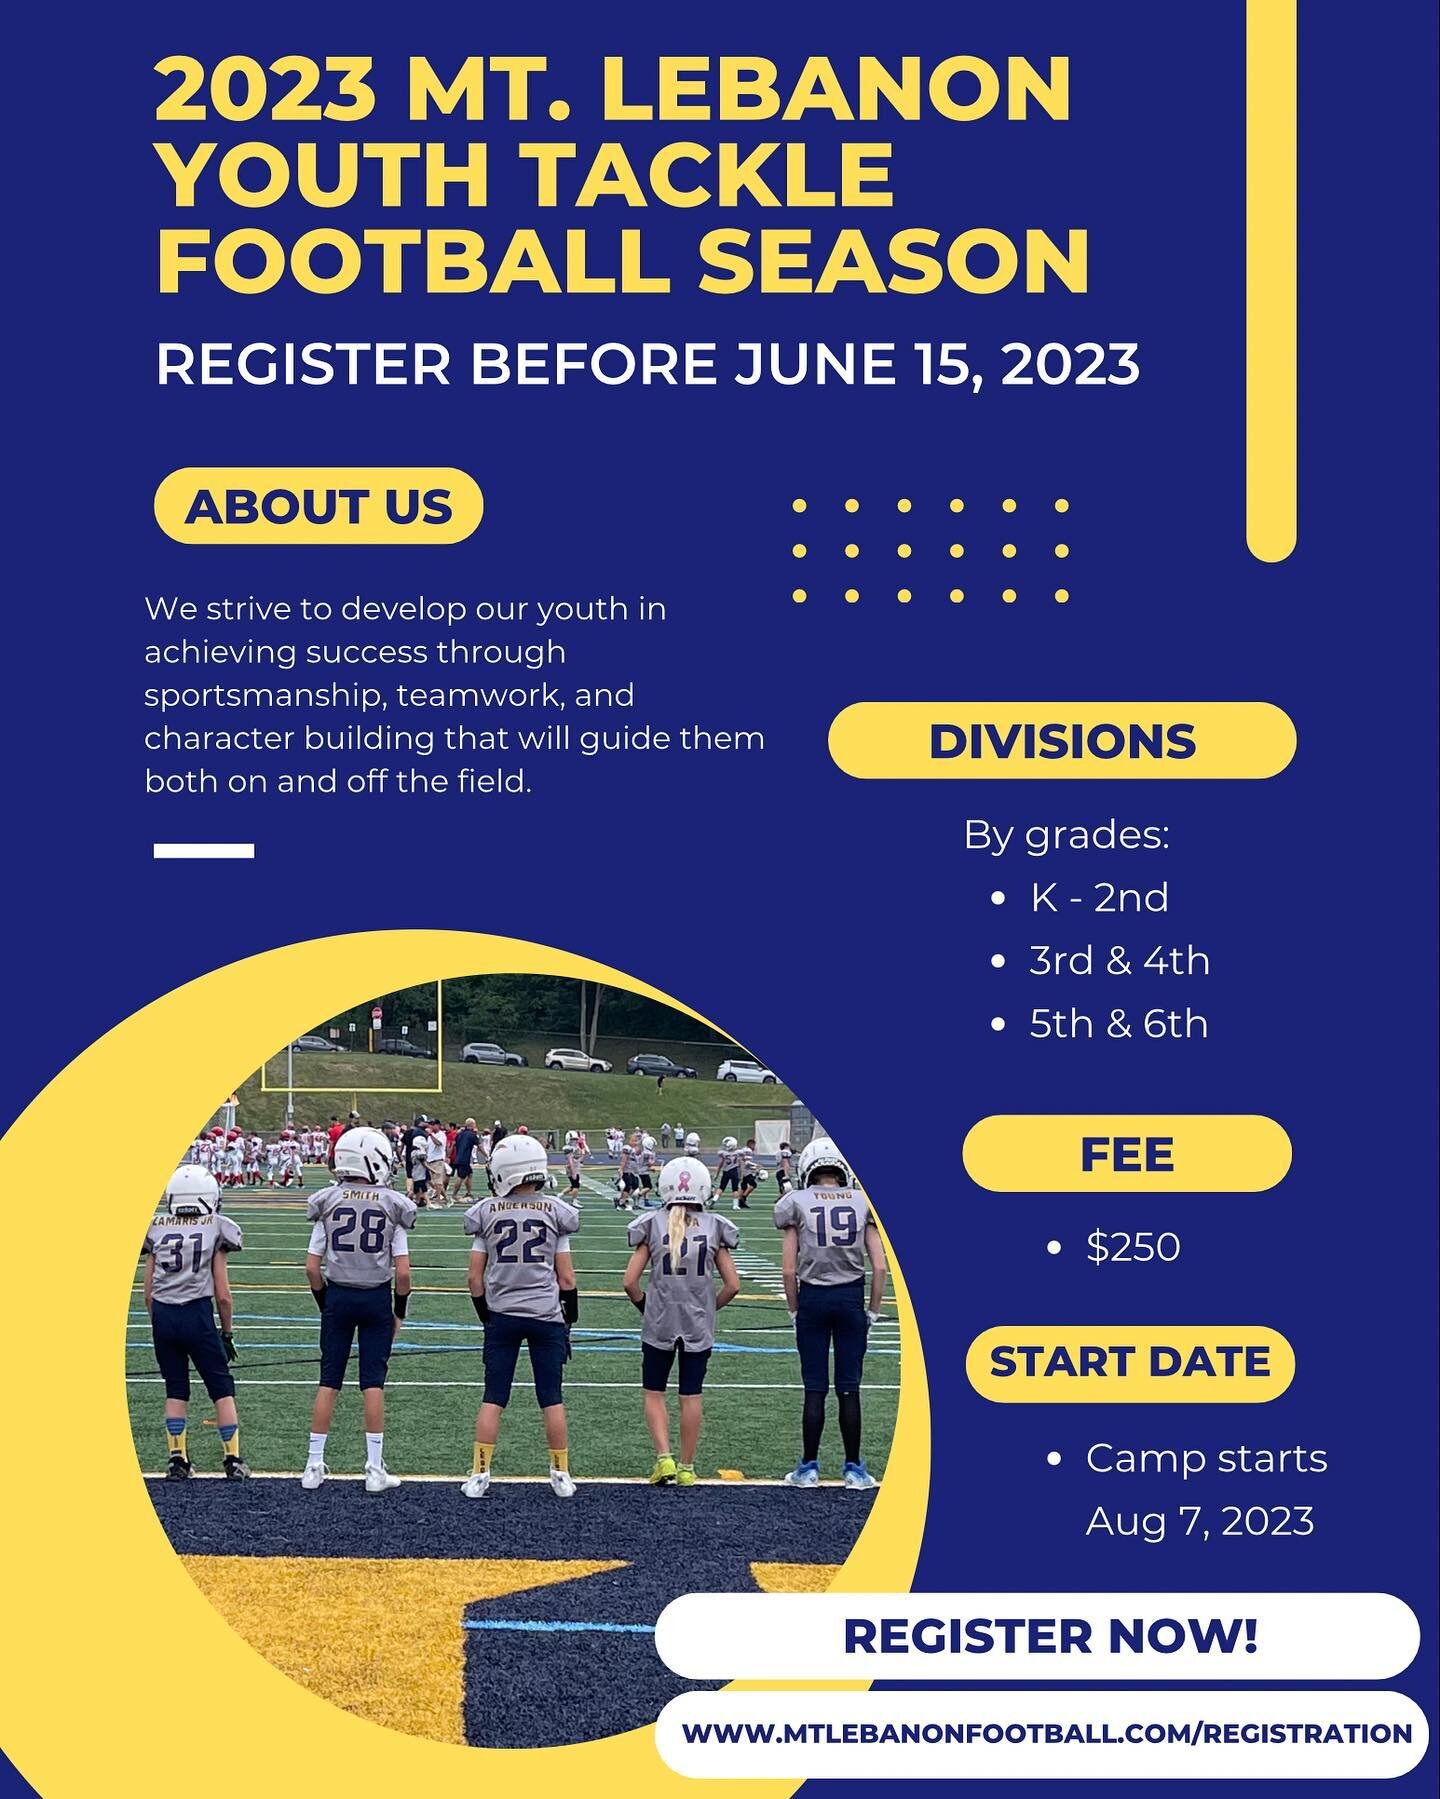 🚨ONLY 3 DAYS LEFT🚨

Only 3 MORE DAYS til registration is closed! If you haven&rsquo;t signed your kid(s) up yet, don&rsquo;t wait any longer!

Follow the link below or click the link in our bio to register.

https://www.mtlebanonfootball.com/regist